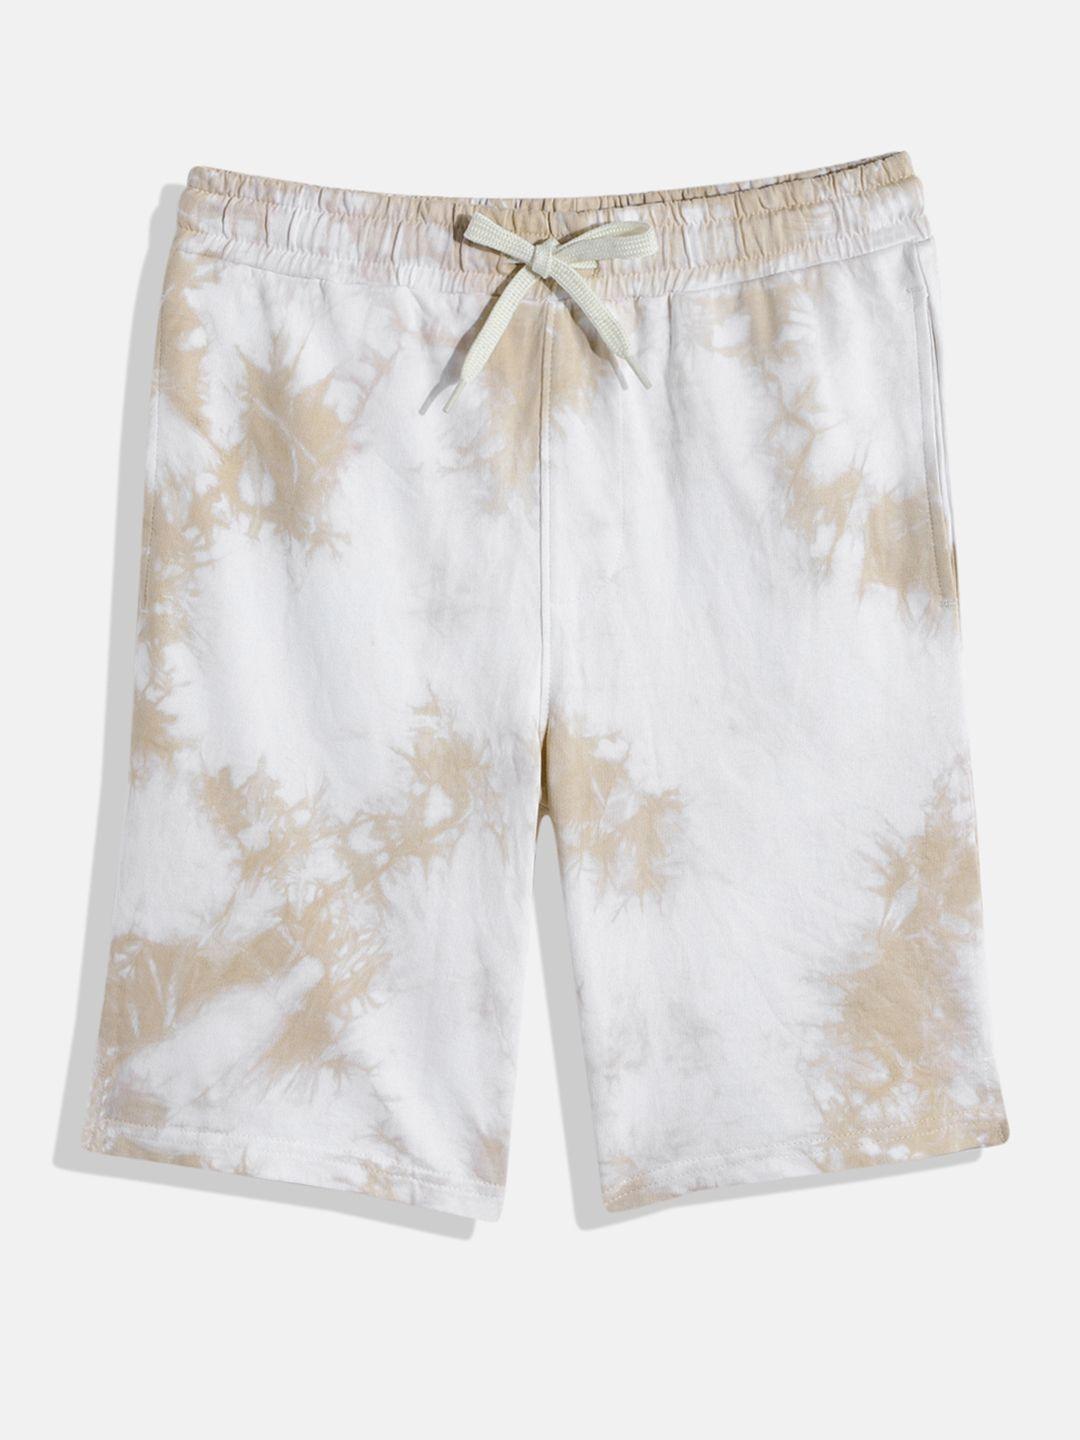 m&h-juniors-boys-white-and-khaki-abstract-printed-pure-cotton-shorts